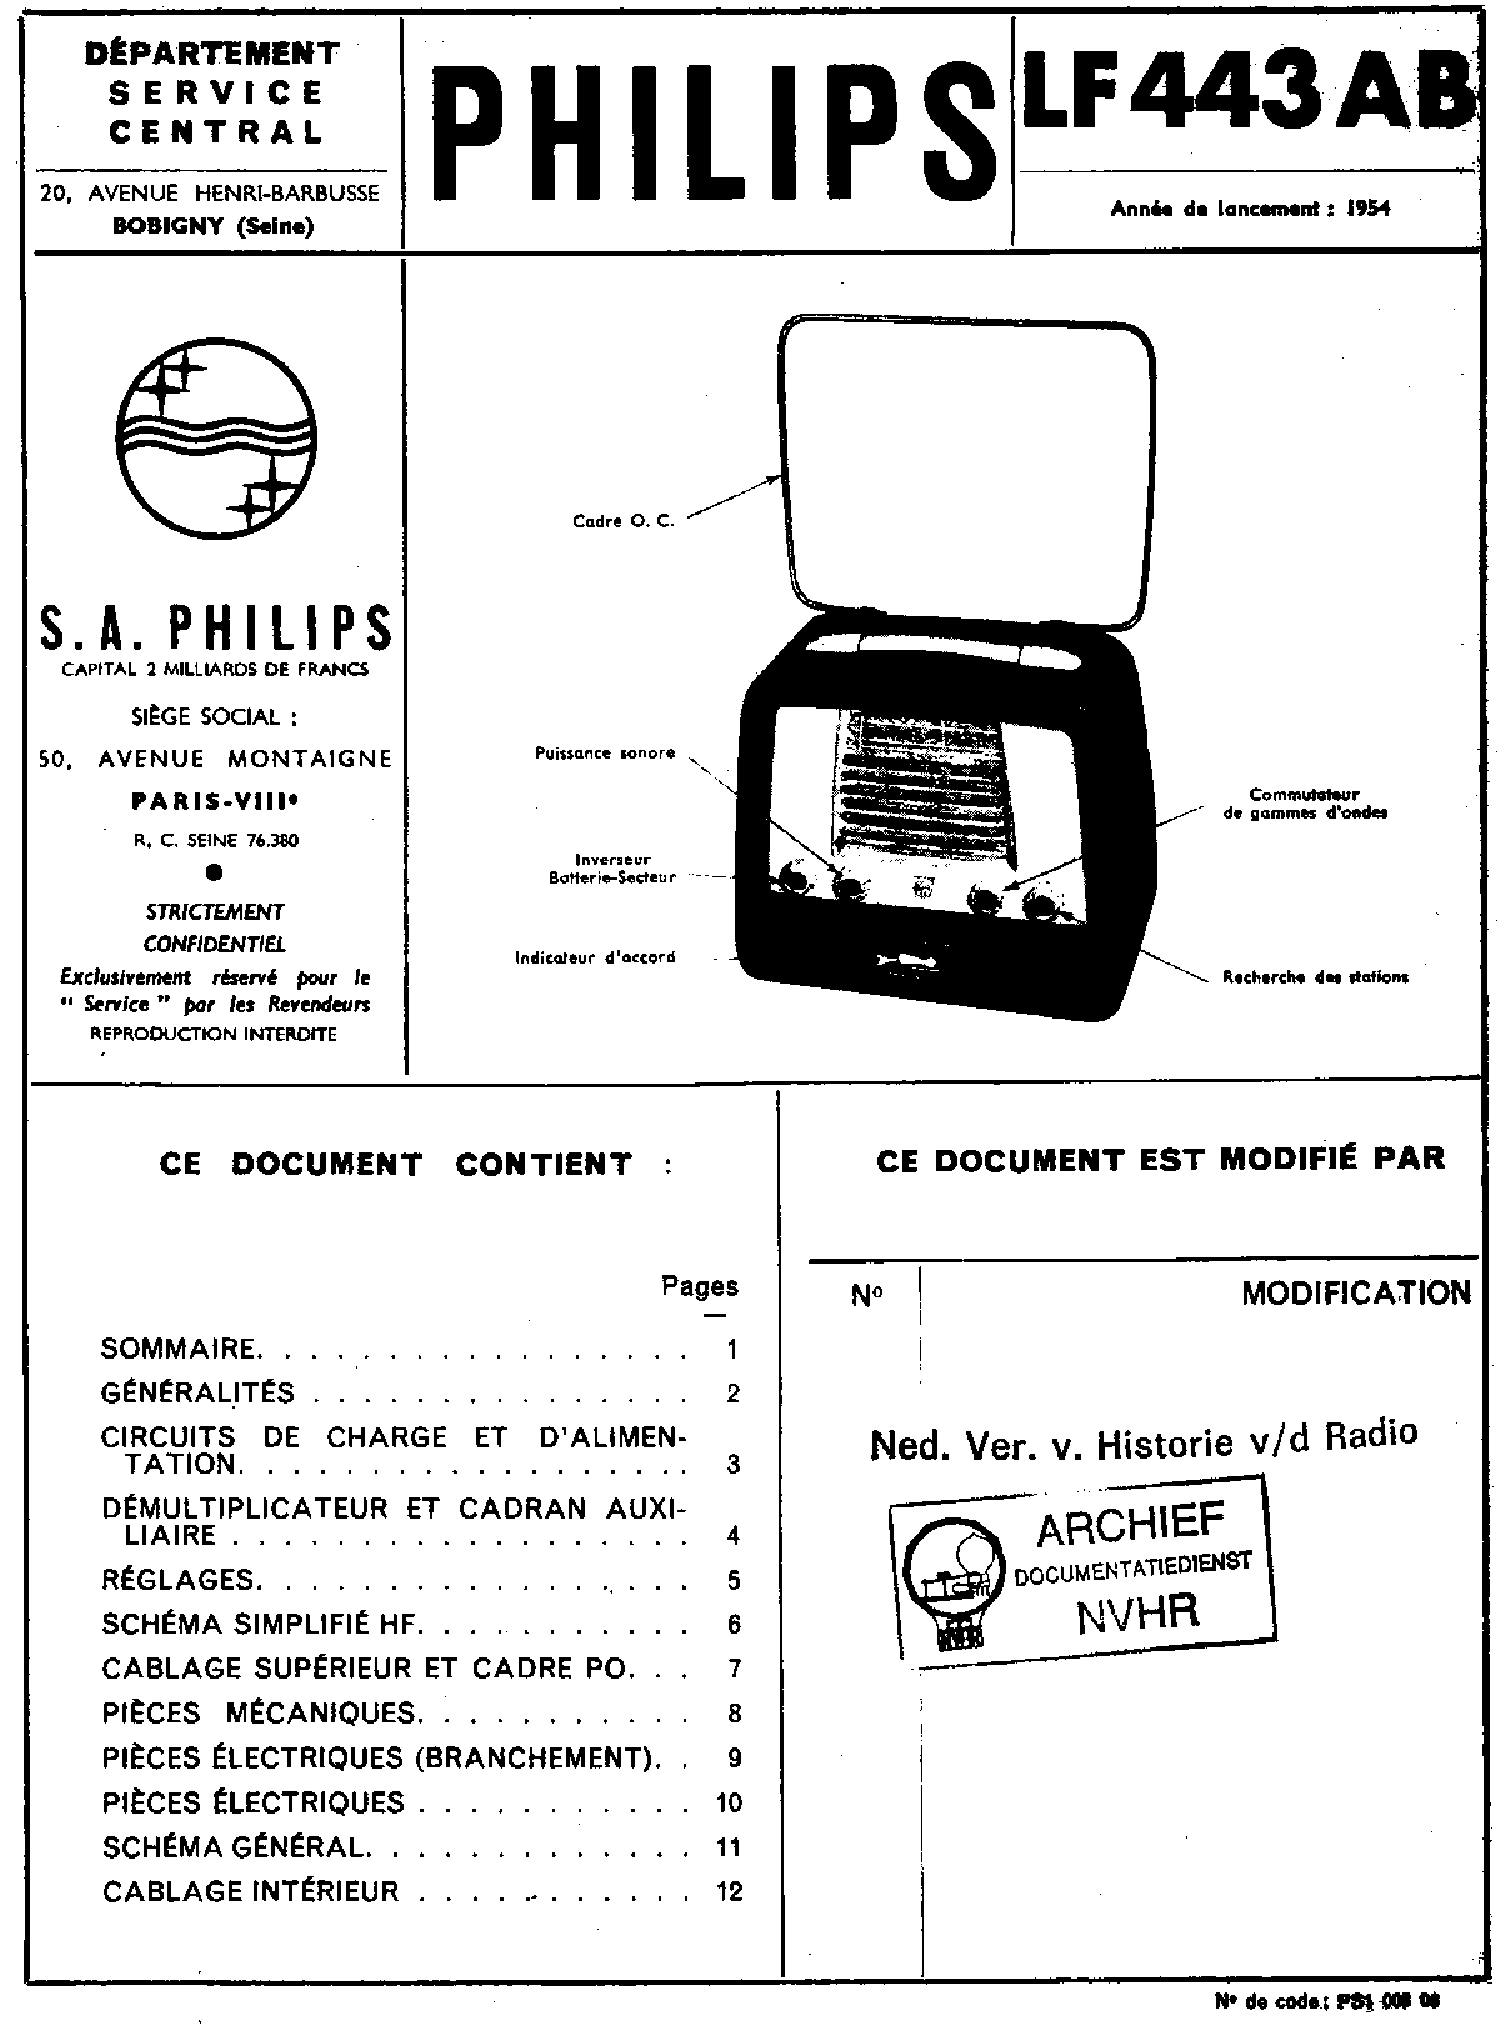 PHILIPS LF443AB PORTABLE VALVES AC-BATTERYY RECEIVER 1954 SM service manual (1st page)